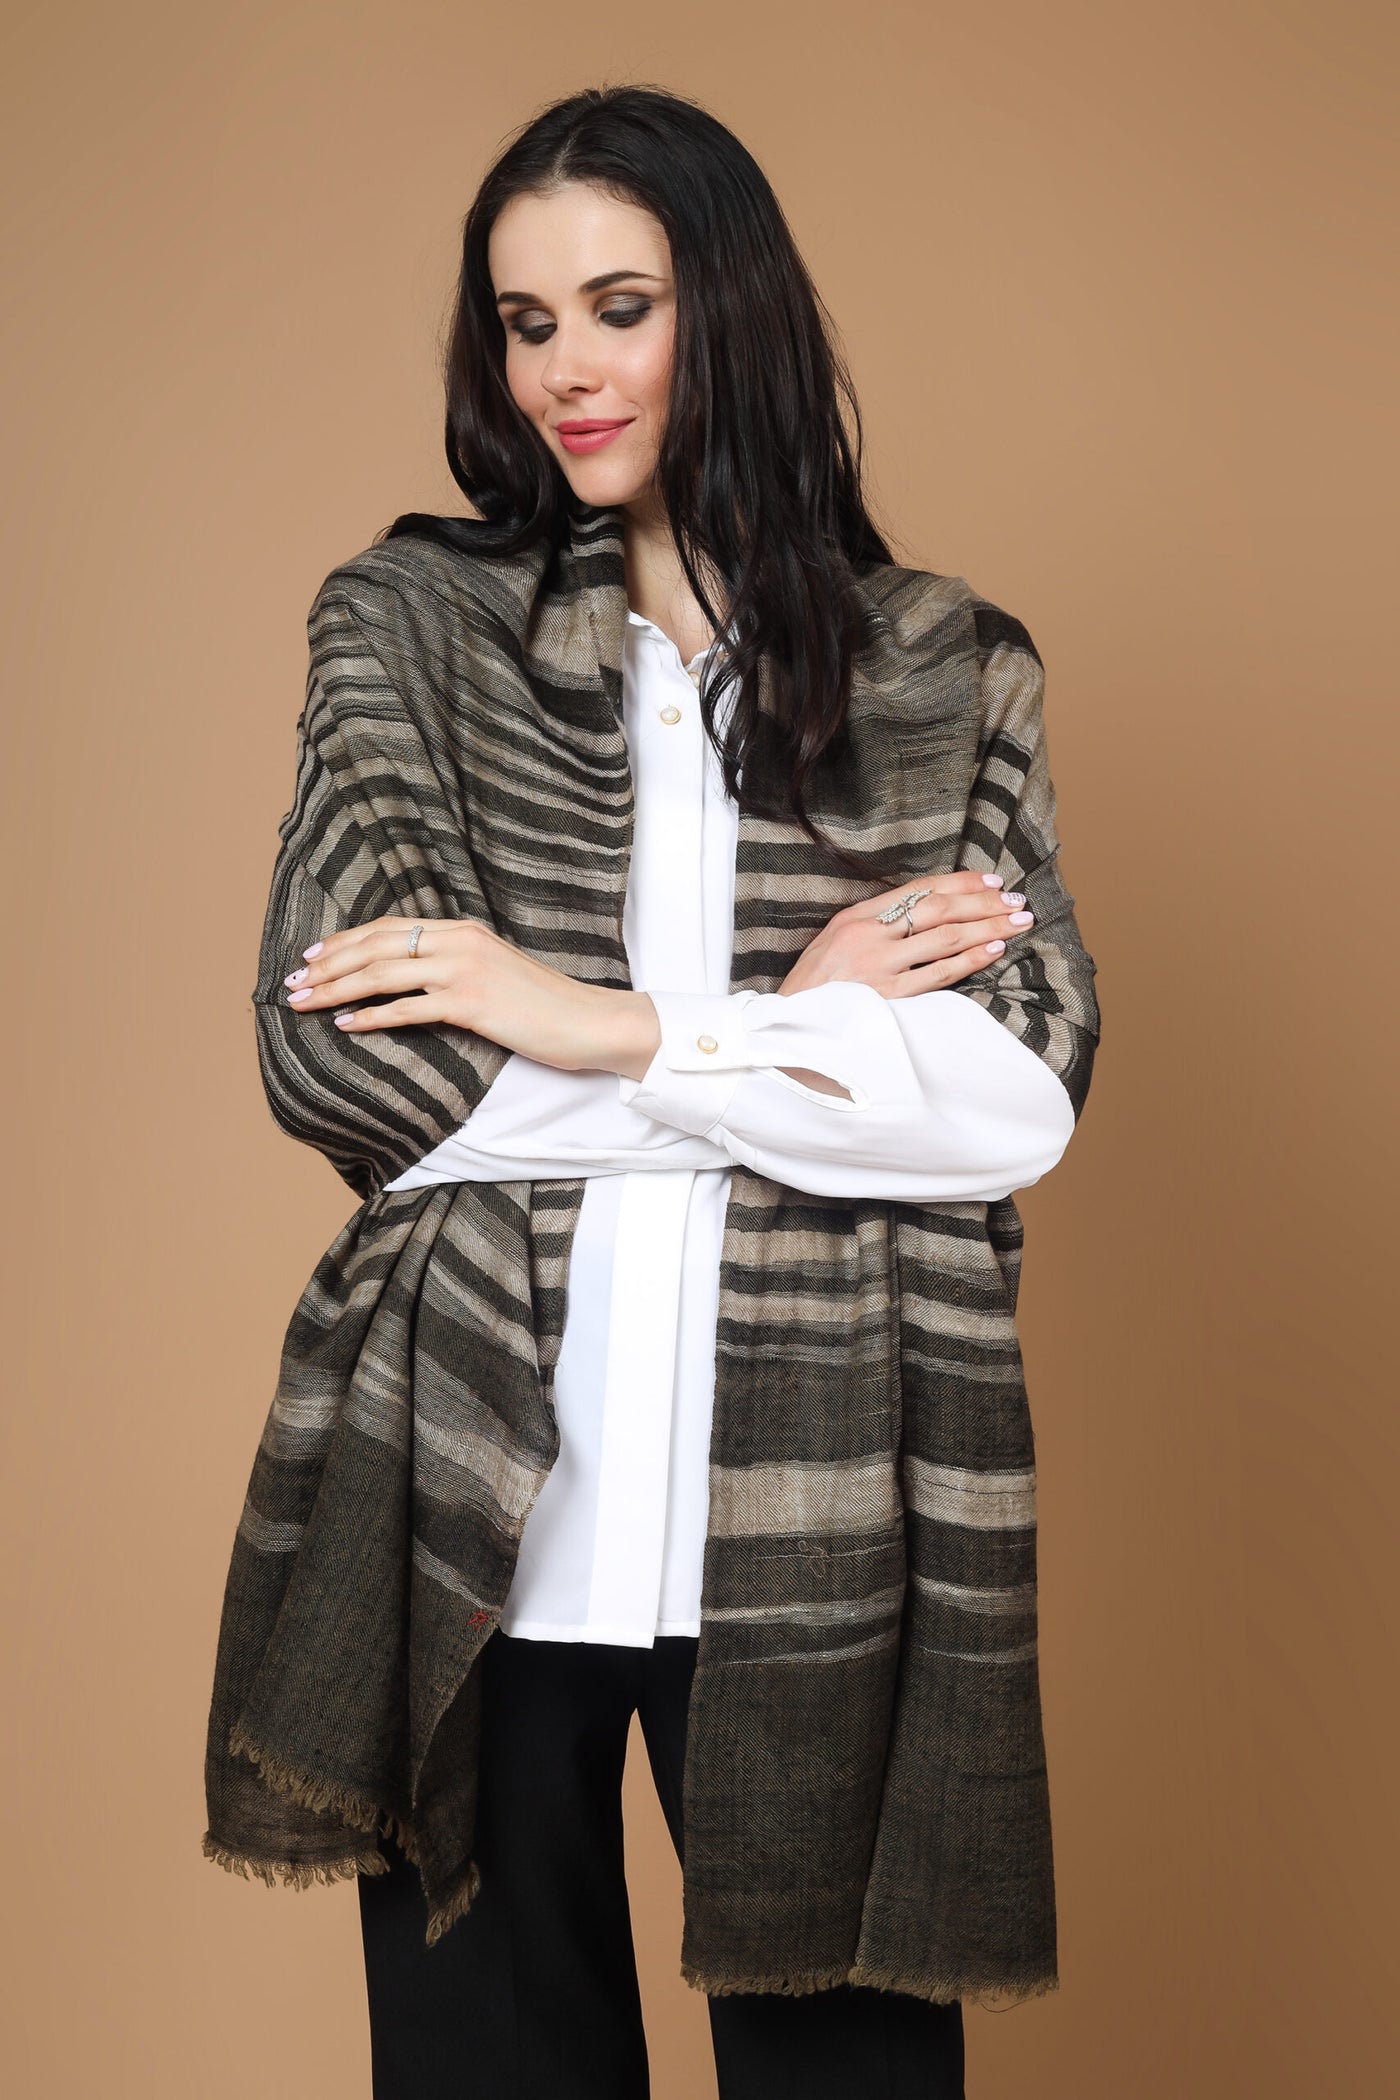 PASHMINA SOUTHEX - luxurious winter item thanks to its exquisite ikkat design that adds elegance to any outfit.